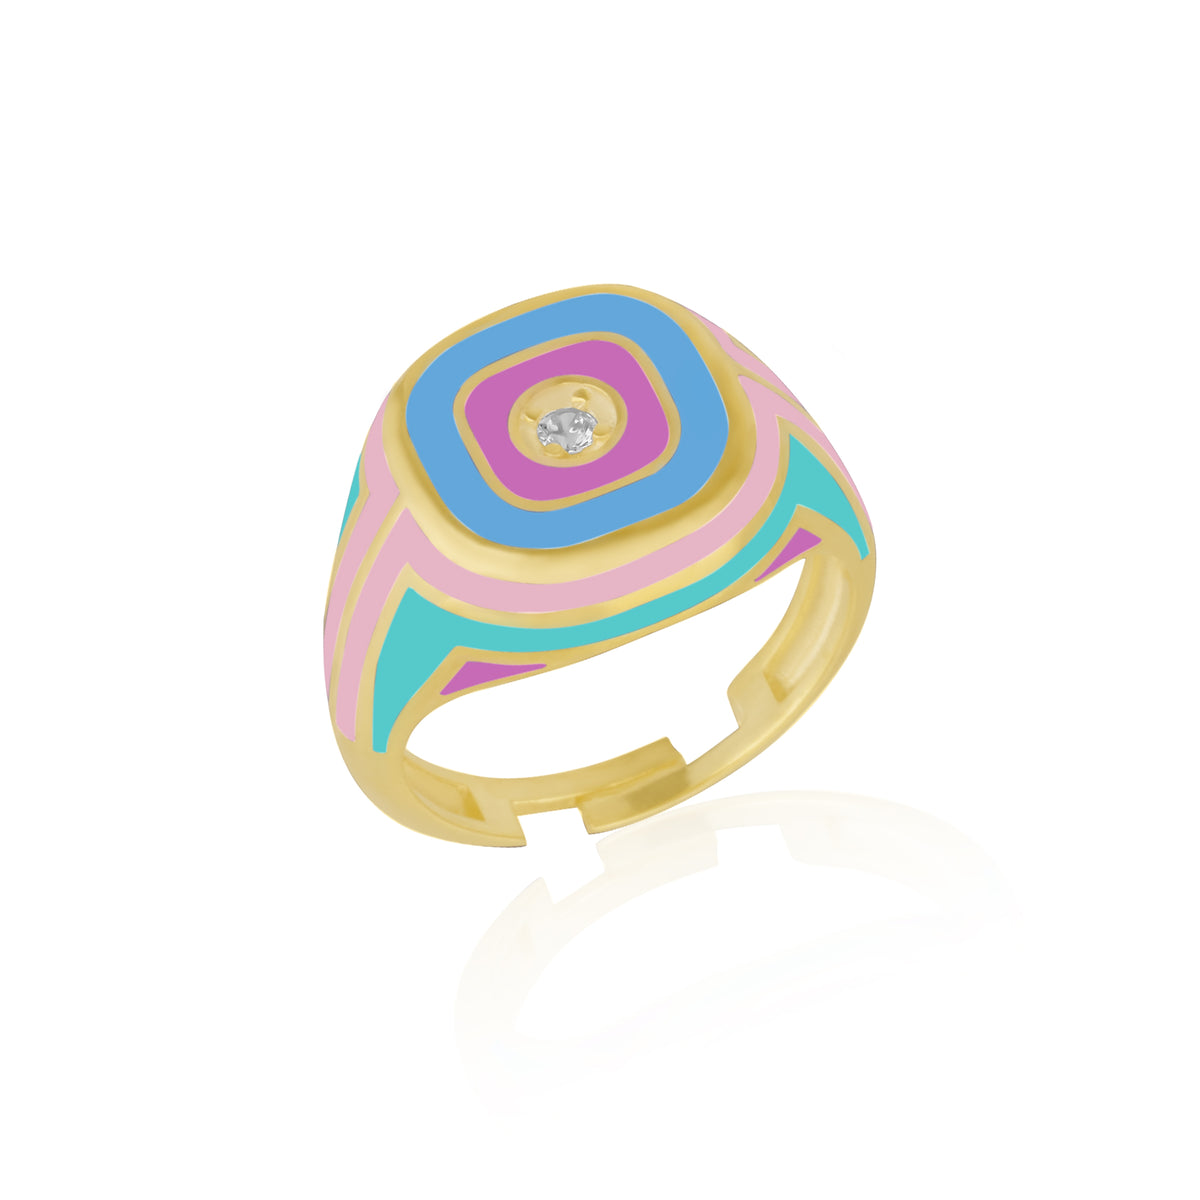 Enamelled Sterling Silver Signet Ring With Gemstone